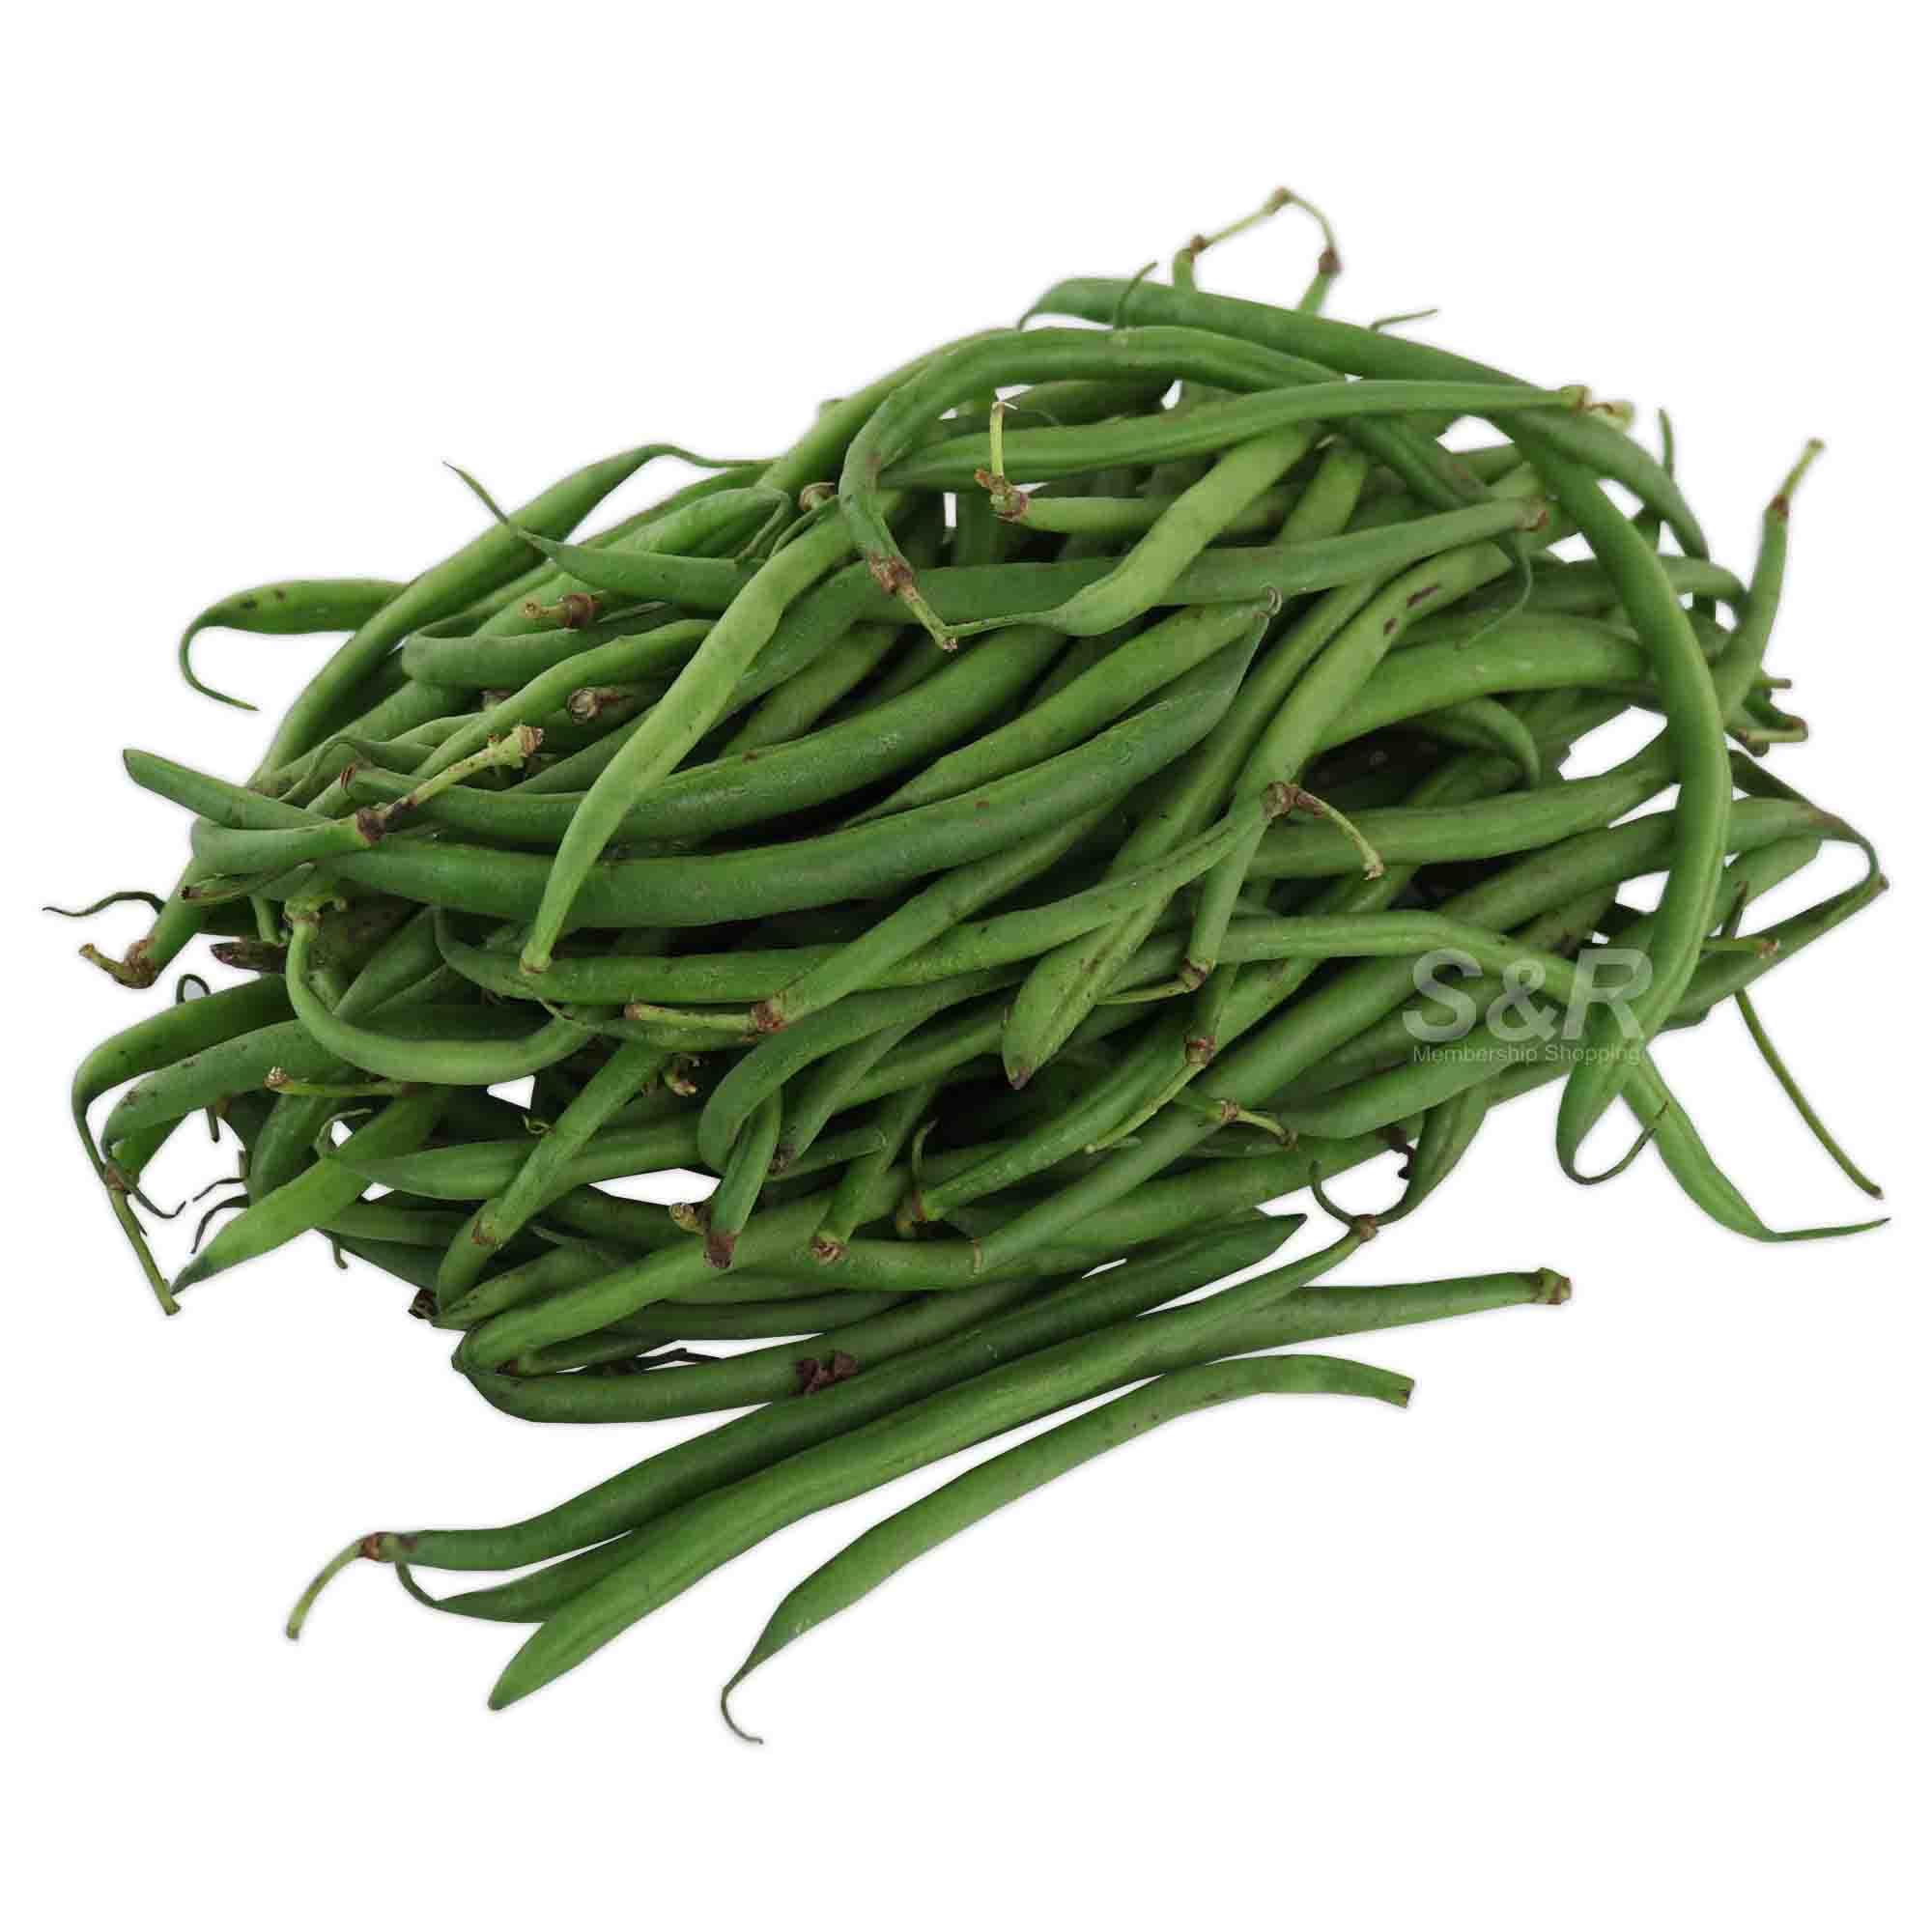 S&R French Beans approx. 800g